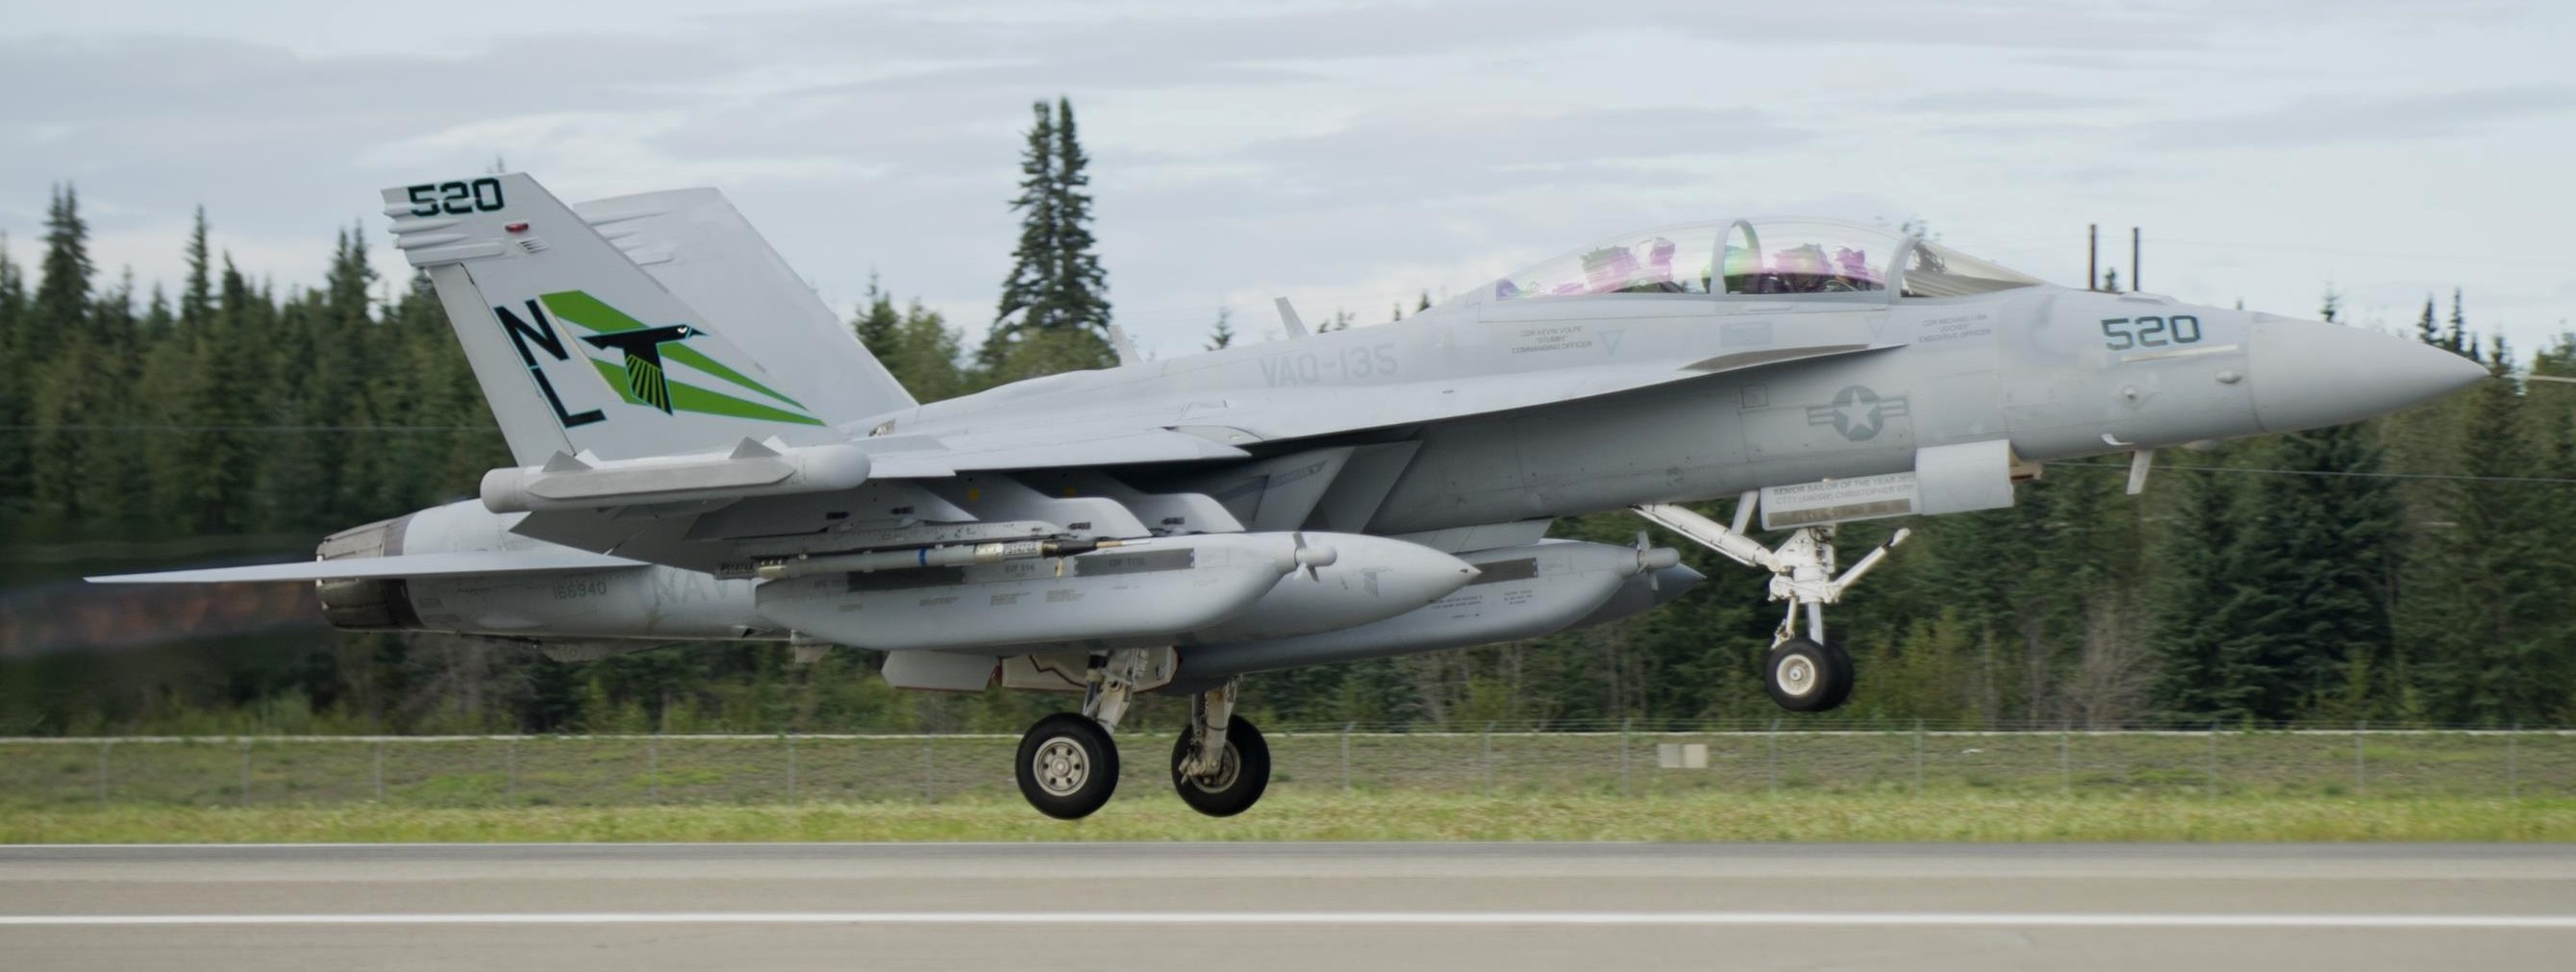 vaq-135 black ravens electronic attack squadron vaqron us navy boeing ea-18g growler exercise red flag alaska eielson afb 123